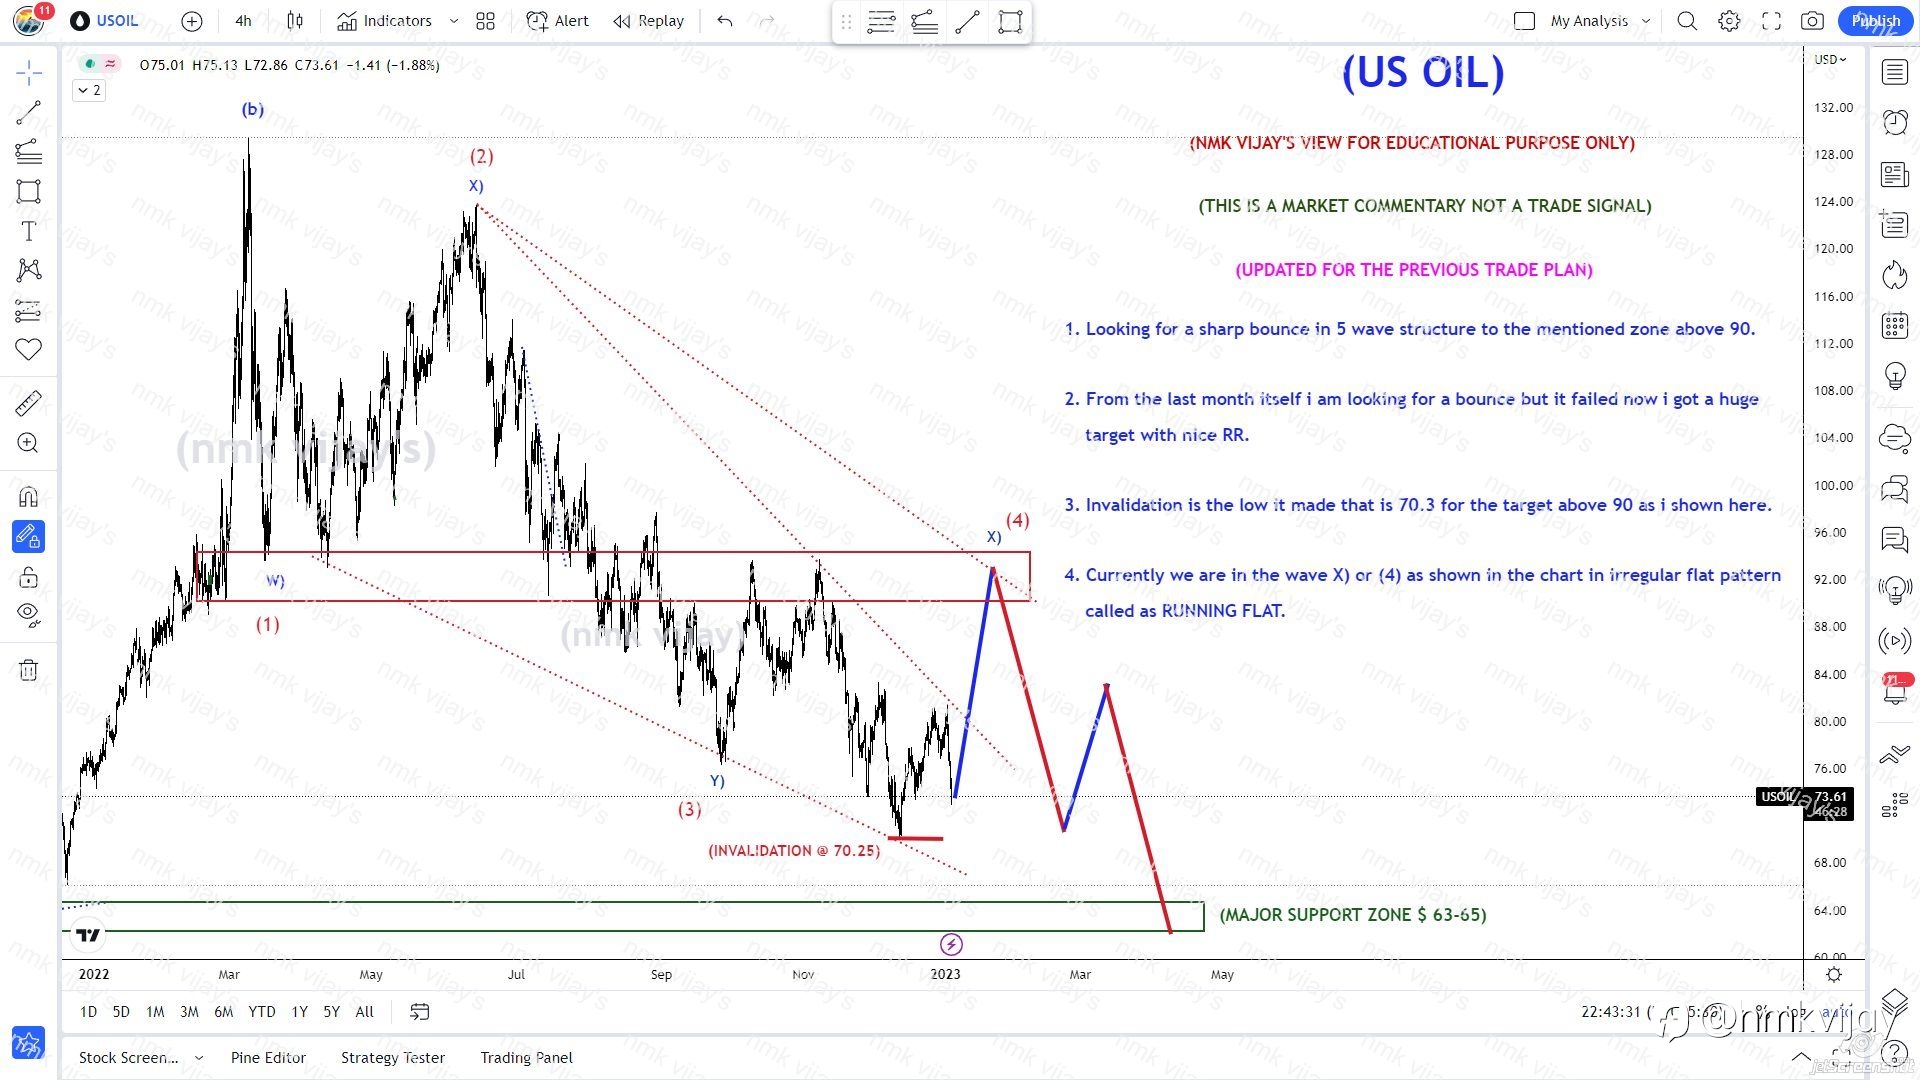 USOIL-Looking again for (X) or (4) to above 90$